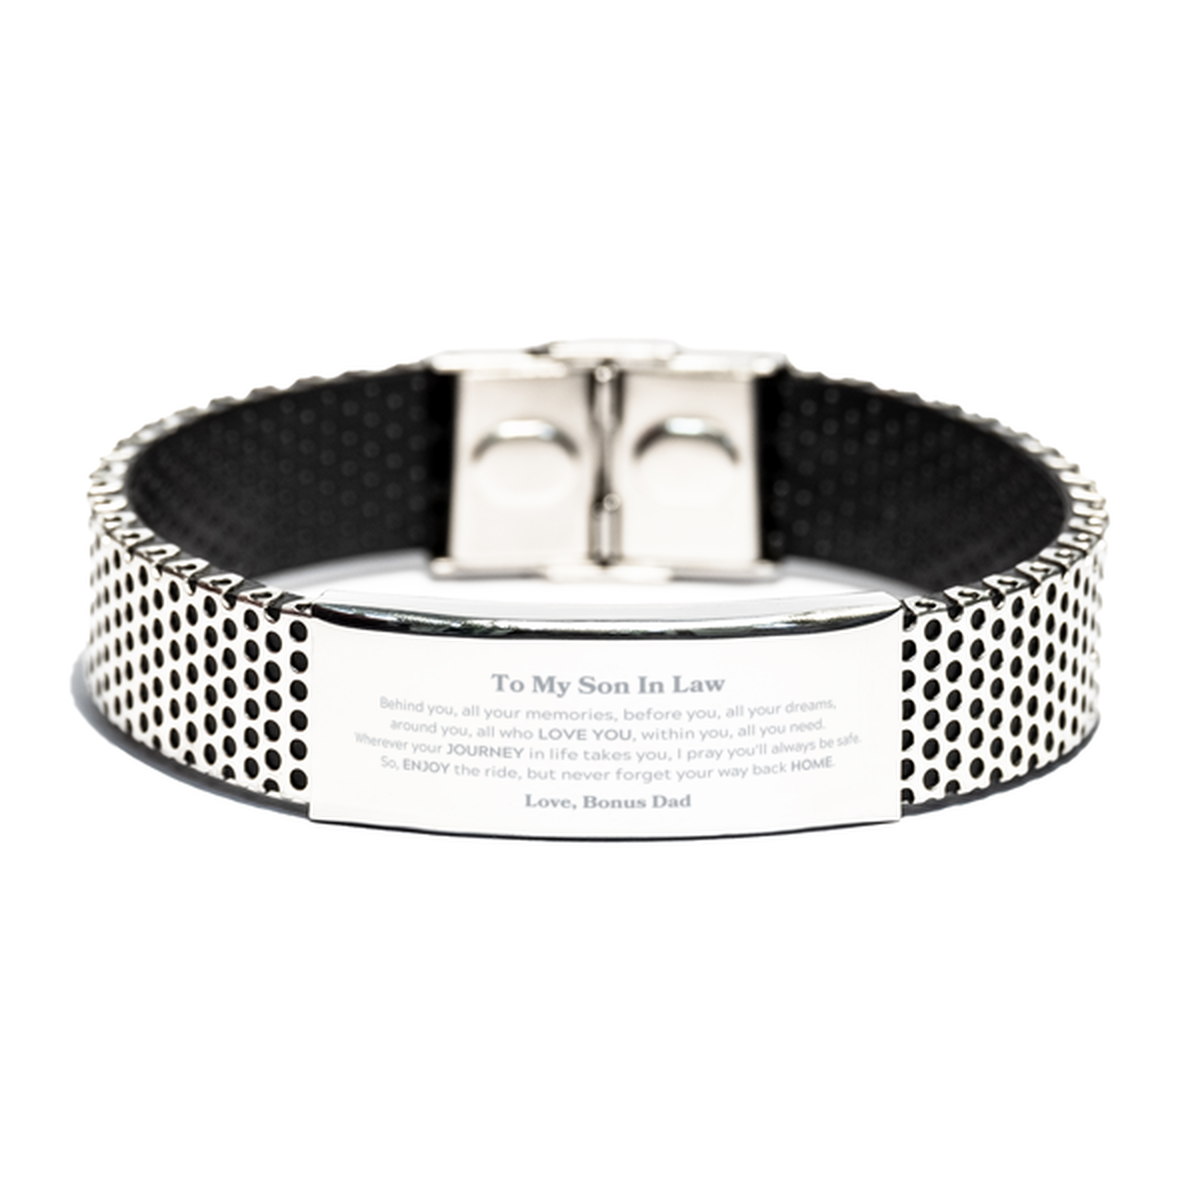 To My Son In Law Graduation Gifts from Bonus Dad, Son In Law Stainless Steel Bracelet Christmas Birthday Gifts for Son In Law Behind you, all your memories, before you, all your dreams. Love, Bonus Dad